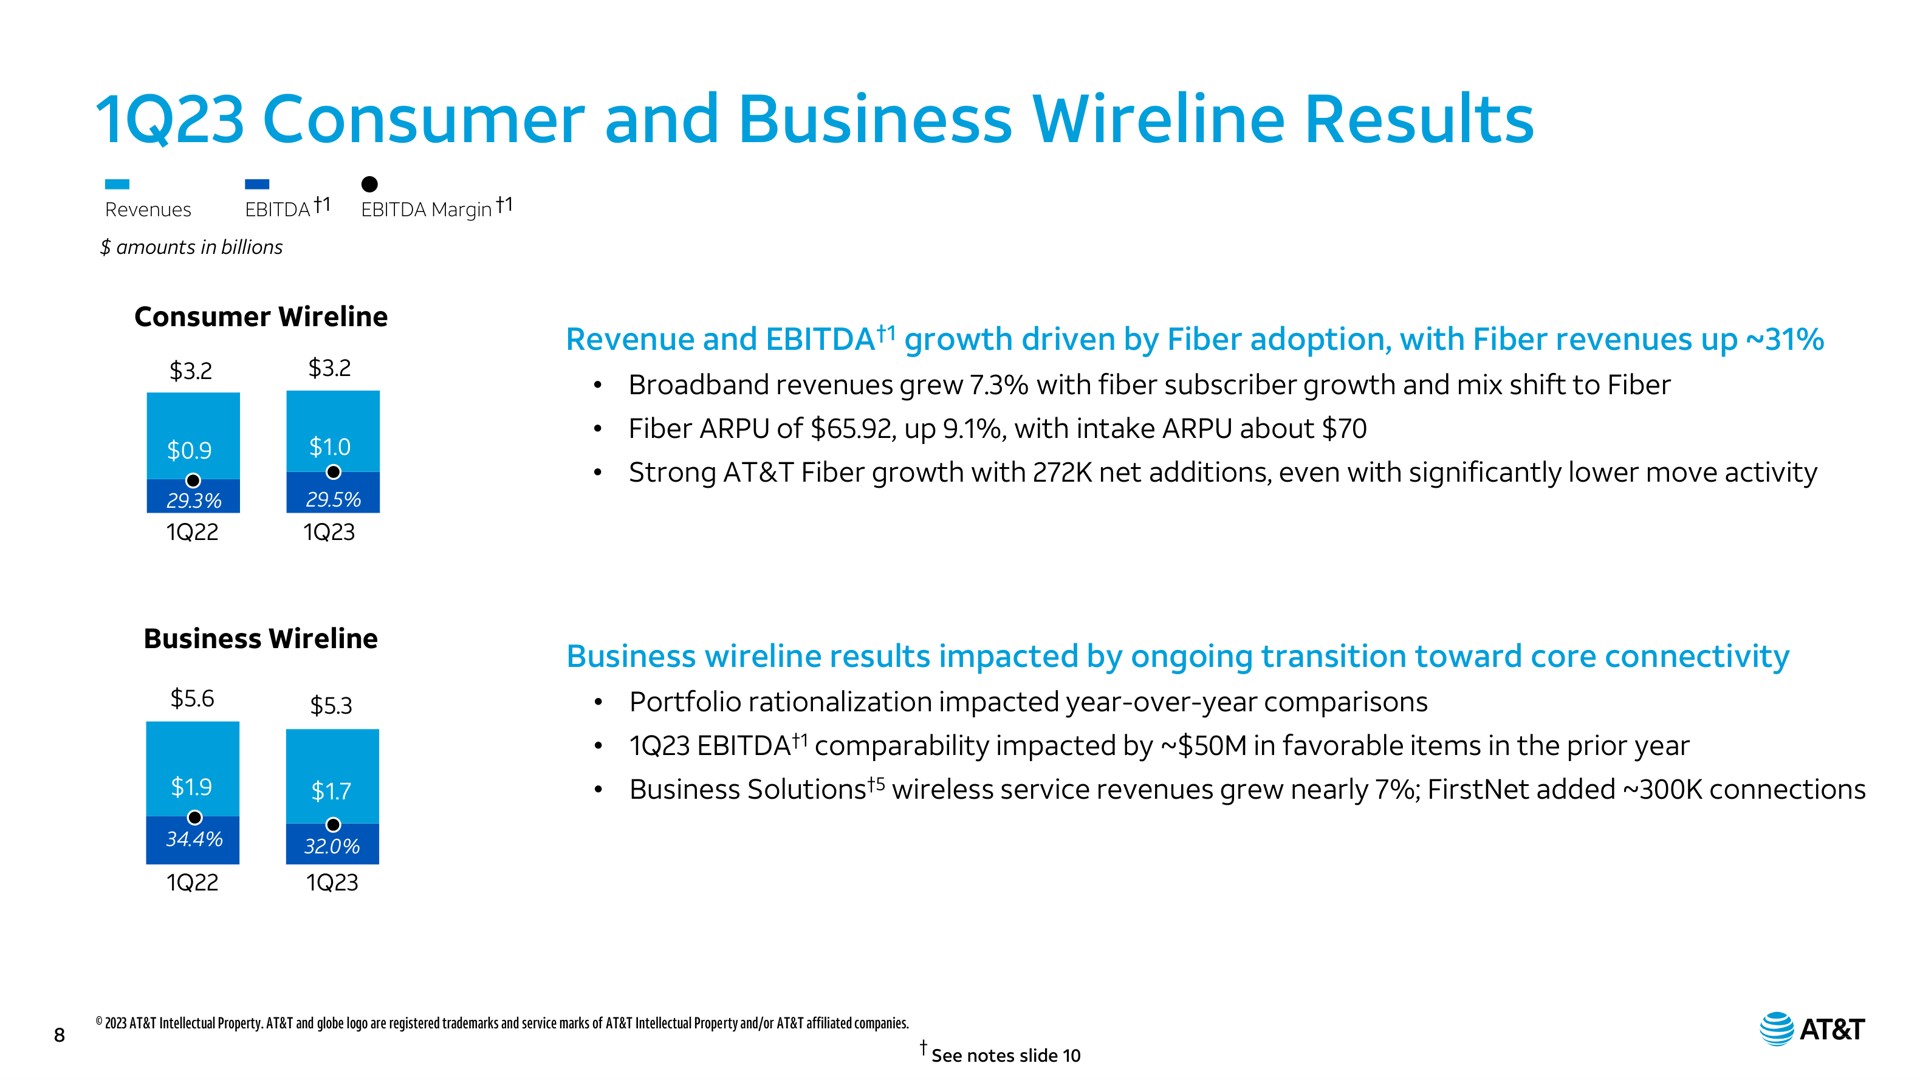 consumer and business results | AT&T